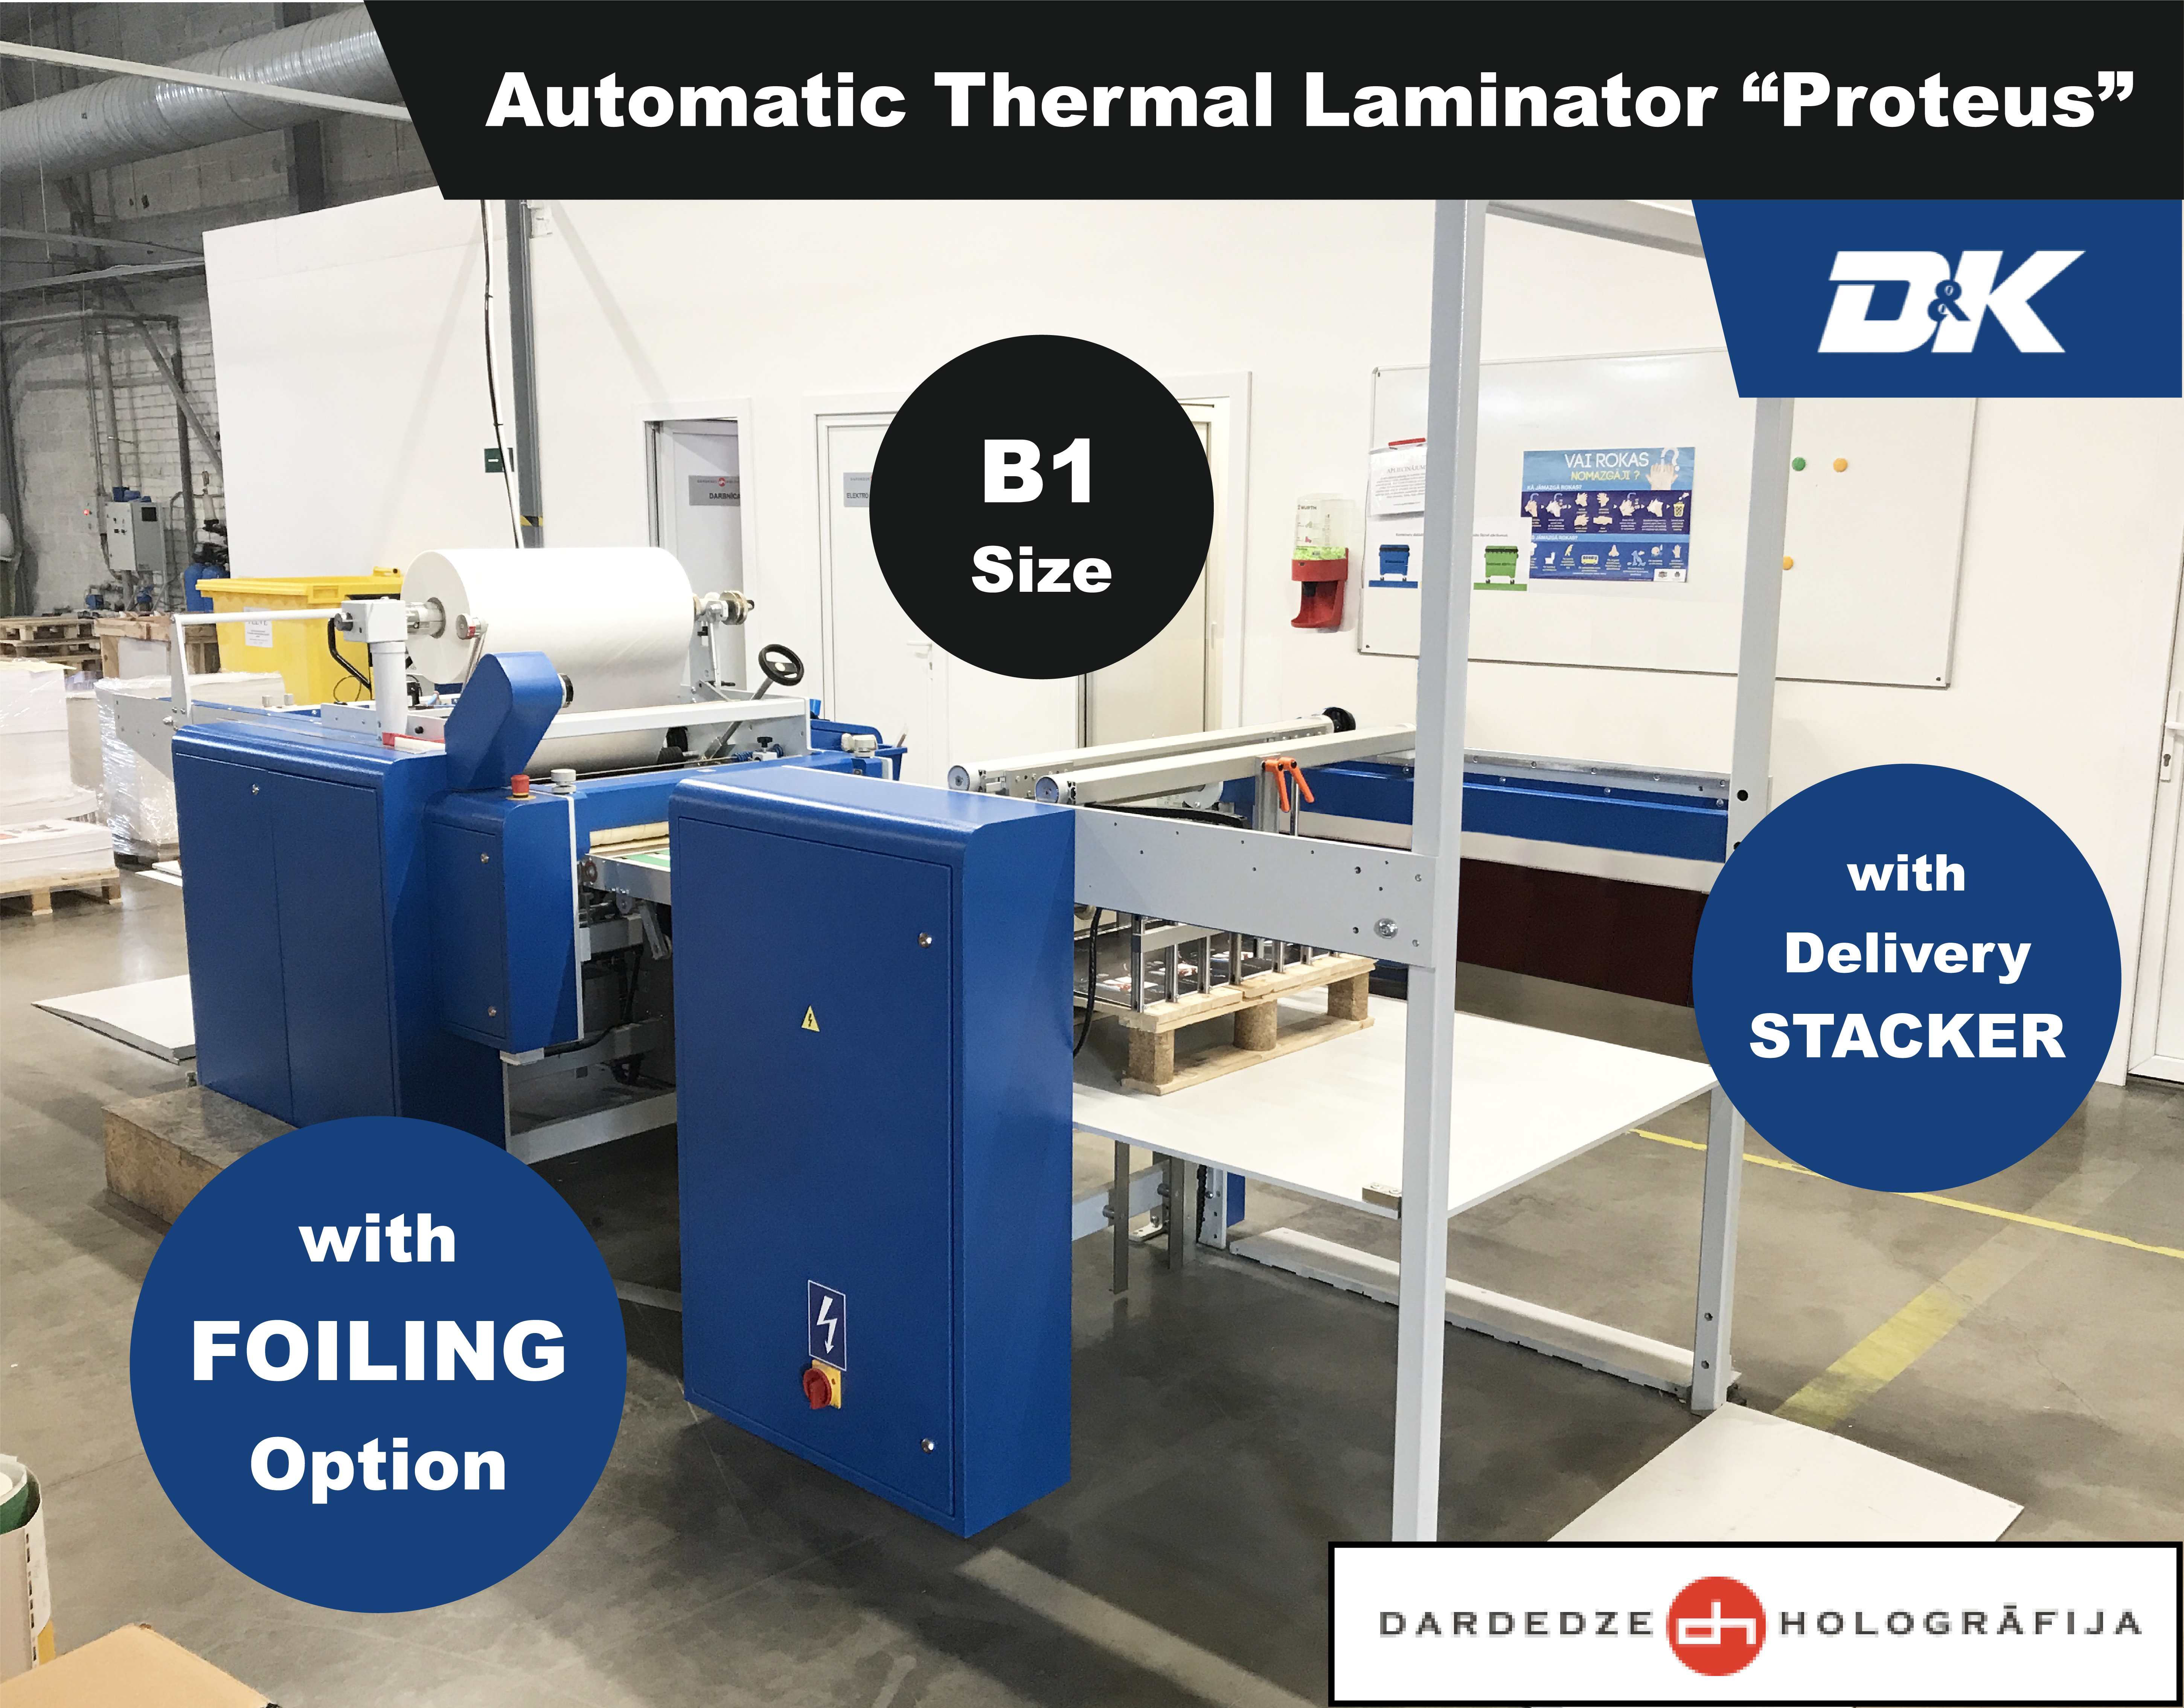 D&K LAMINATOR WITH FOILING OPTION | NEW INSTALLATION!